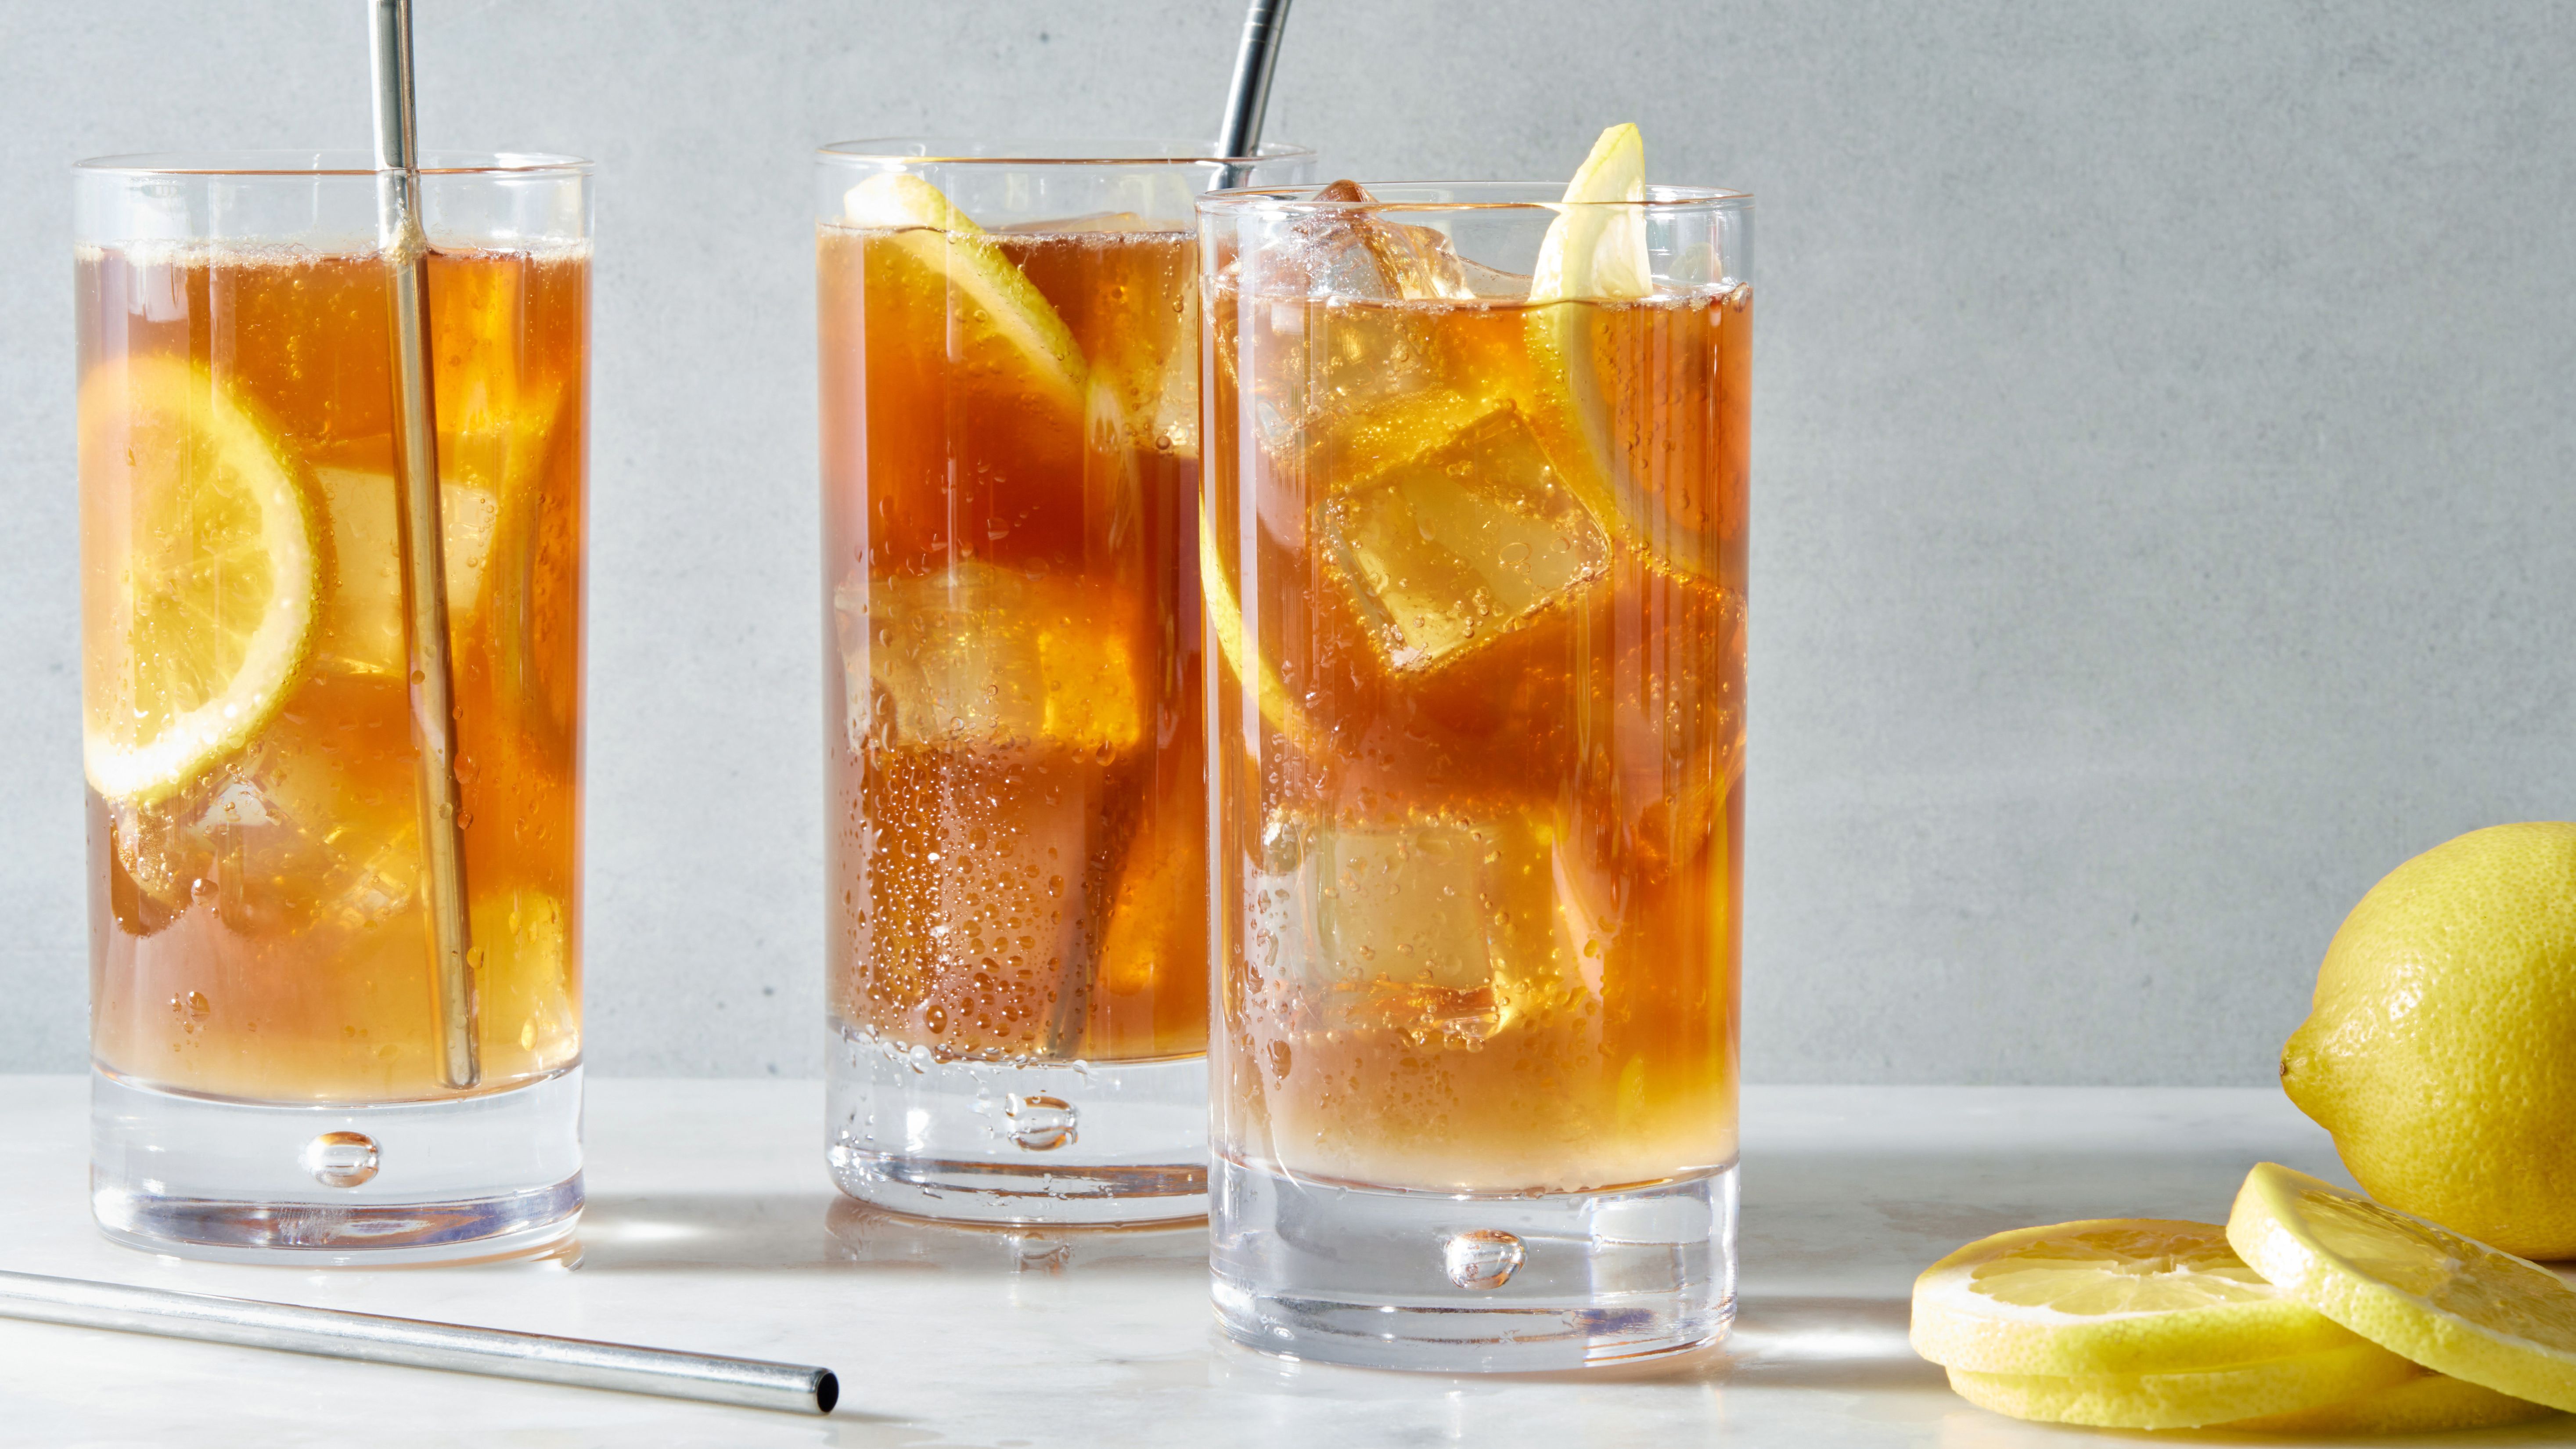 Stay Cool With The Help Of The Best Iced Tea Maker